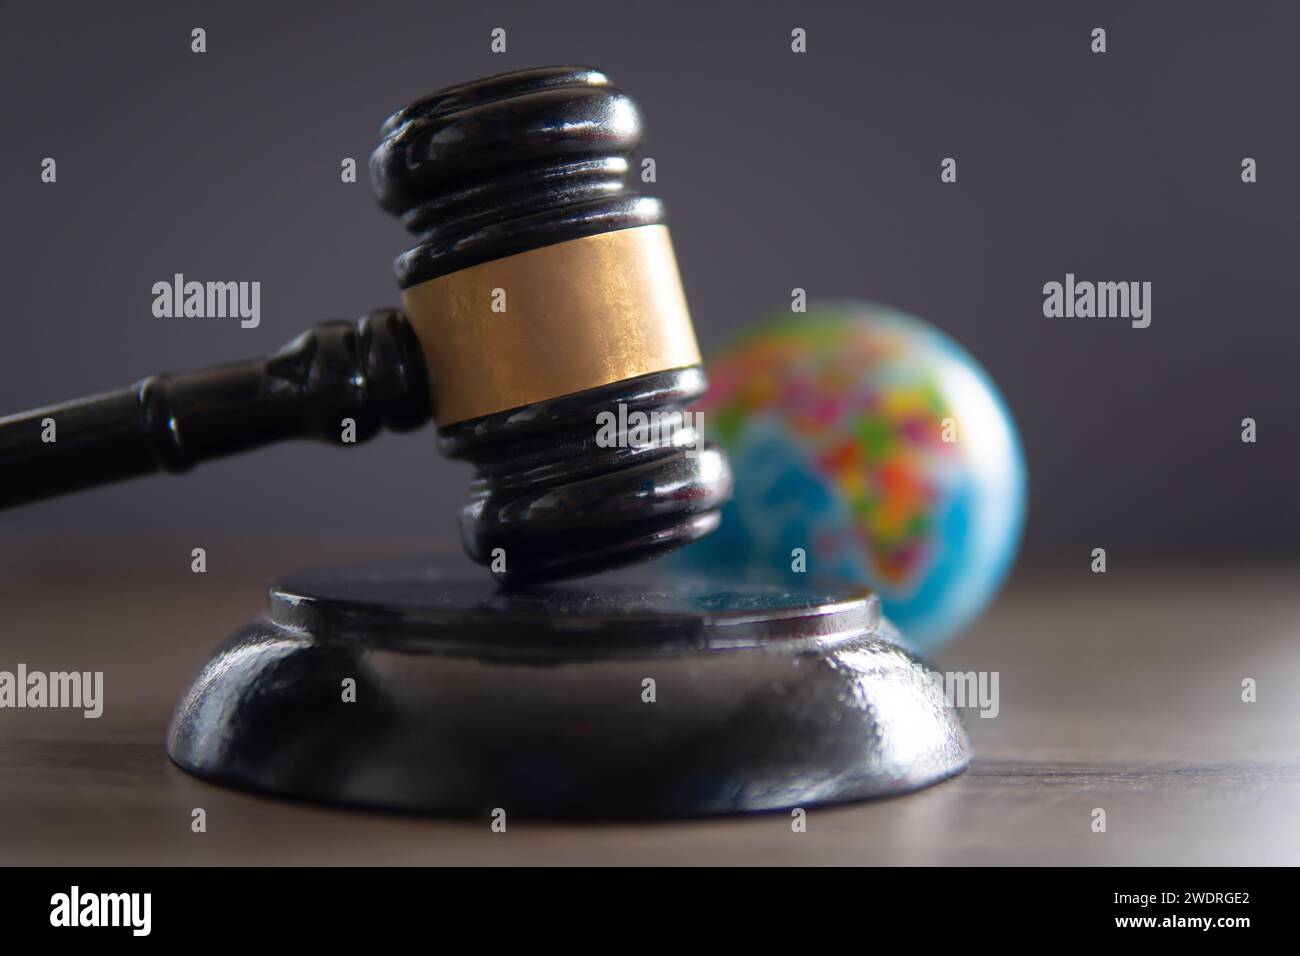 Closeup image of judge gavel and world globe on table. International law concept. Stock Photo